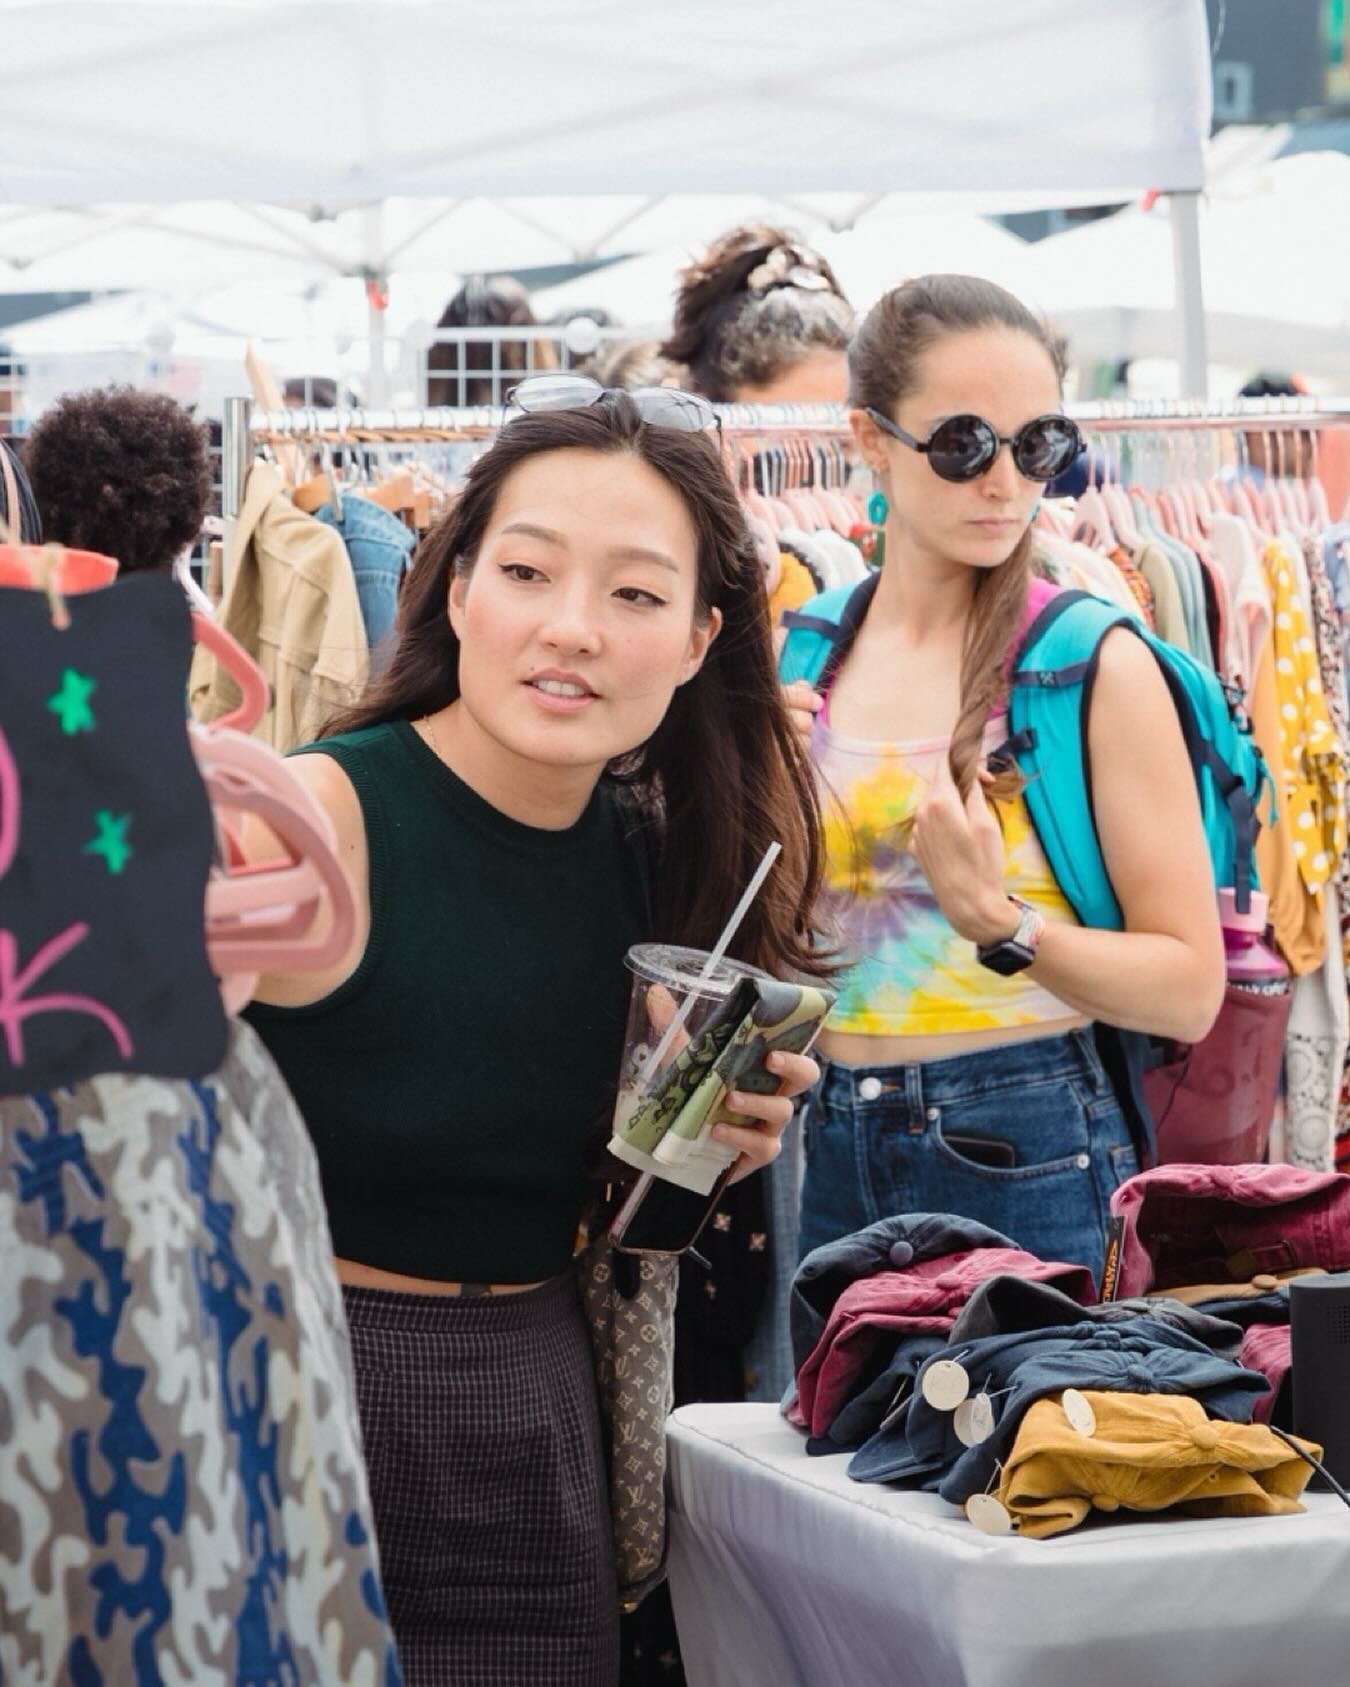 TODAY IN HAYES VALLEY, SF 🌞
.
Come spend the perfect spring Sunday supporting local makers, finding that special item that ✨sparks joy✨ and exploring the small business + culinary scene of a beloved SF neighborhood! 🛍️🎶🏡🍱❤️🌁
.
Join us for HEAD 